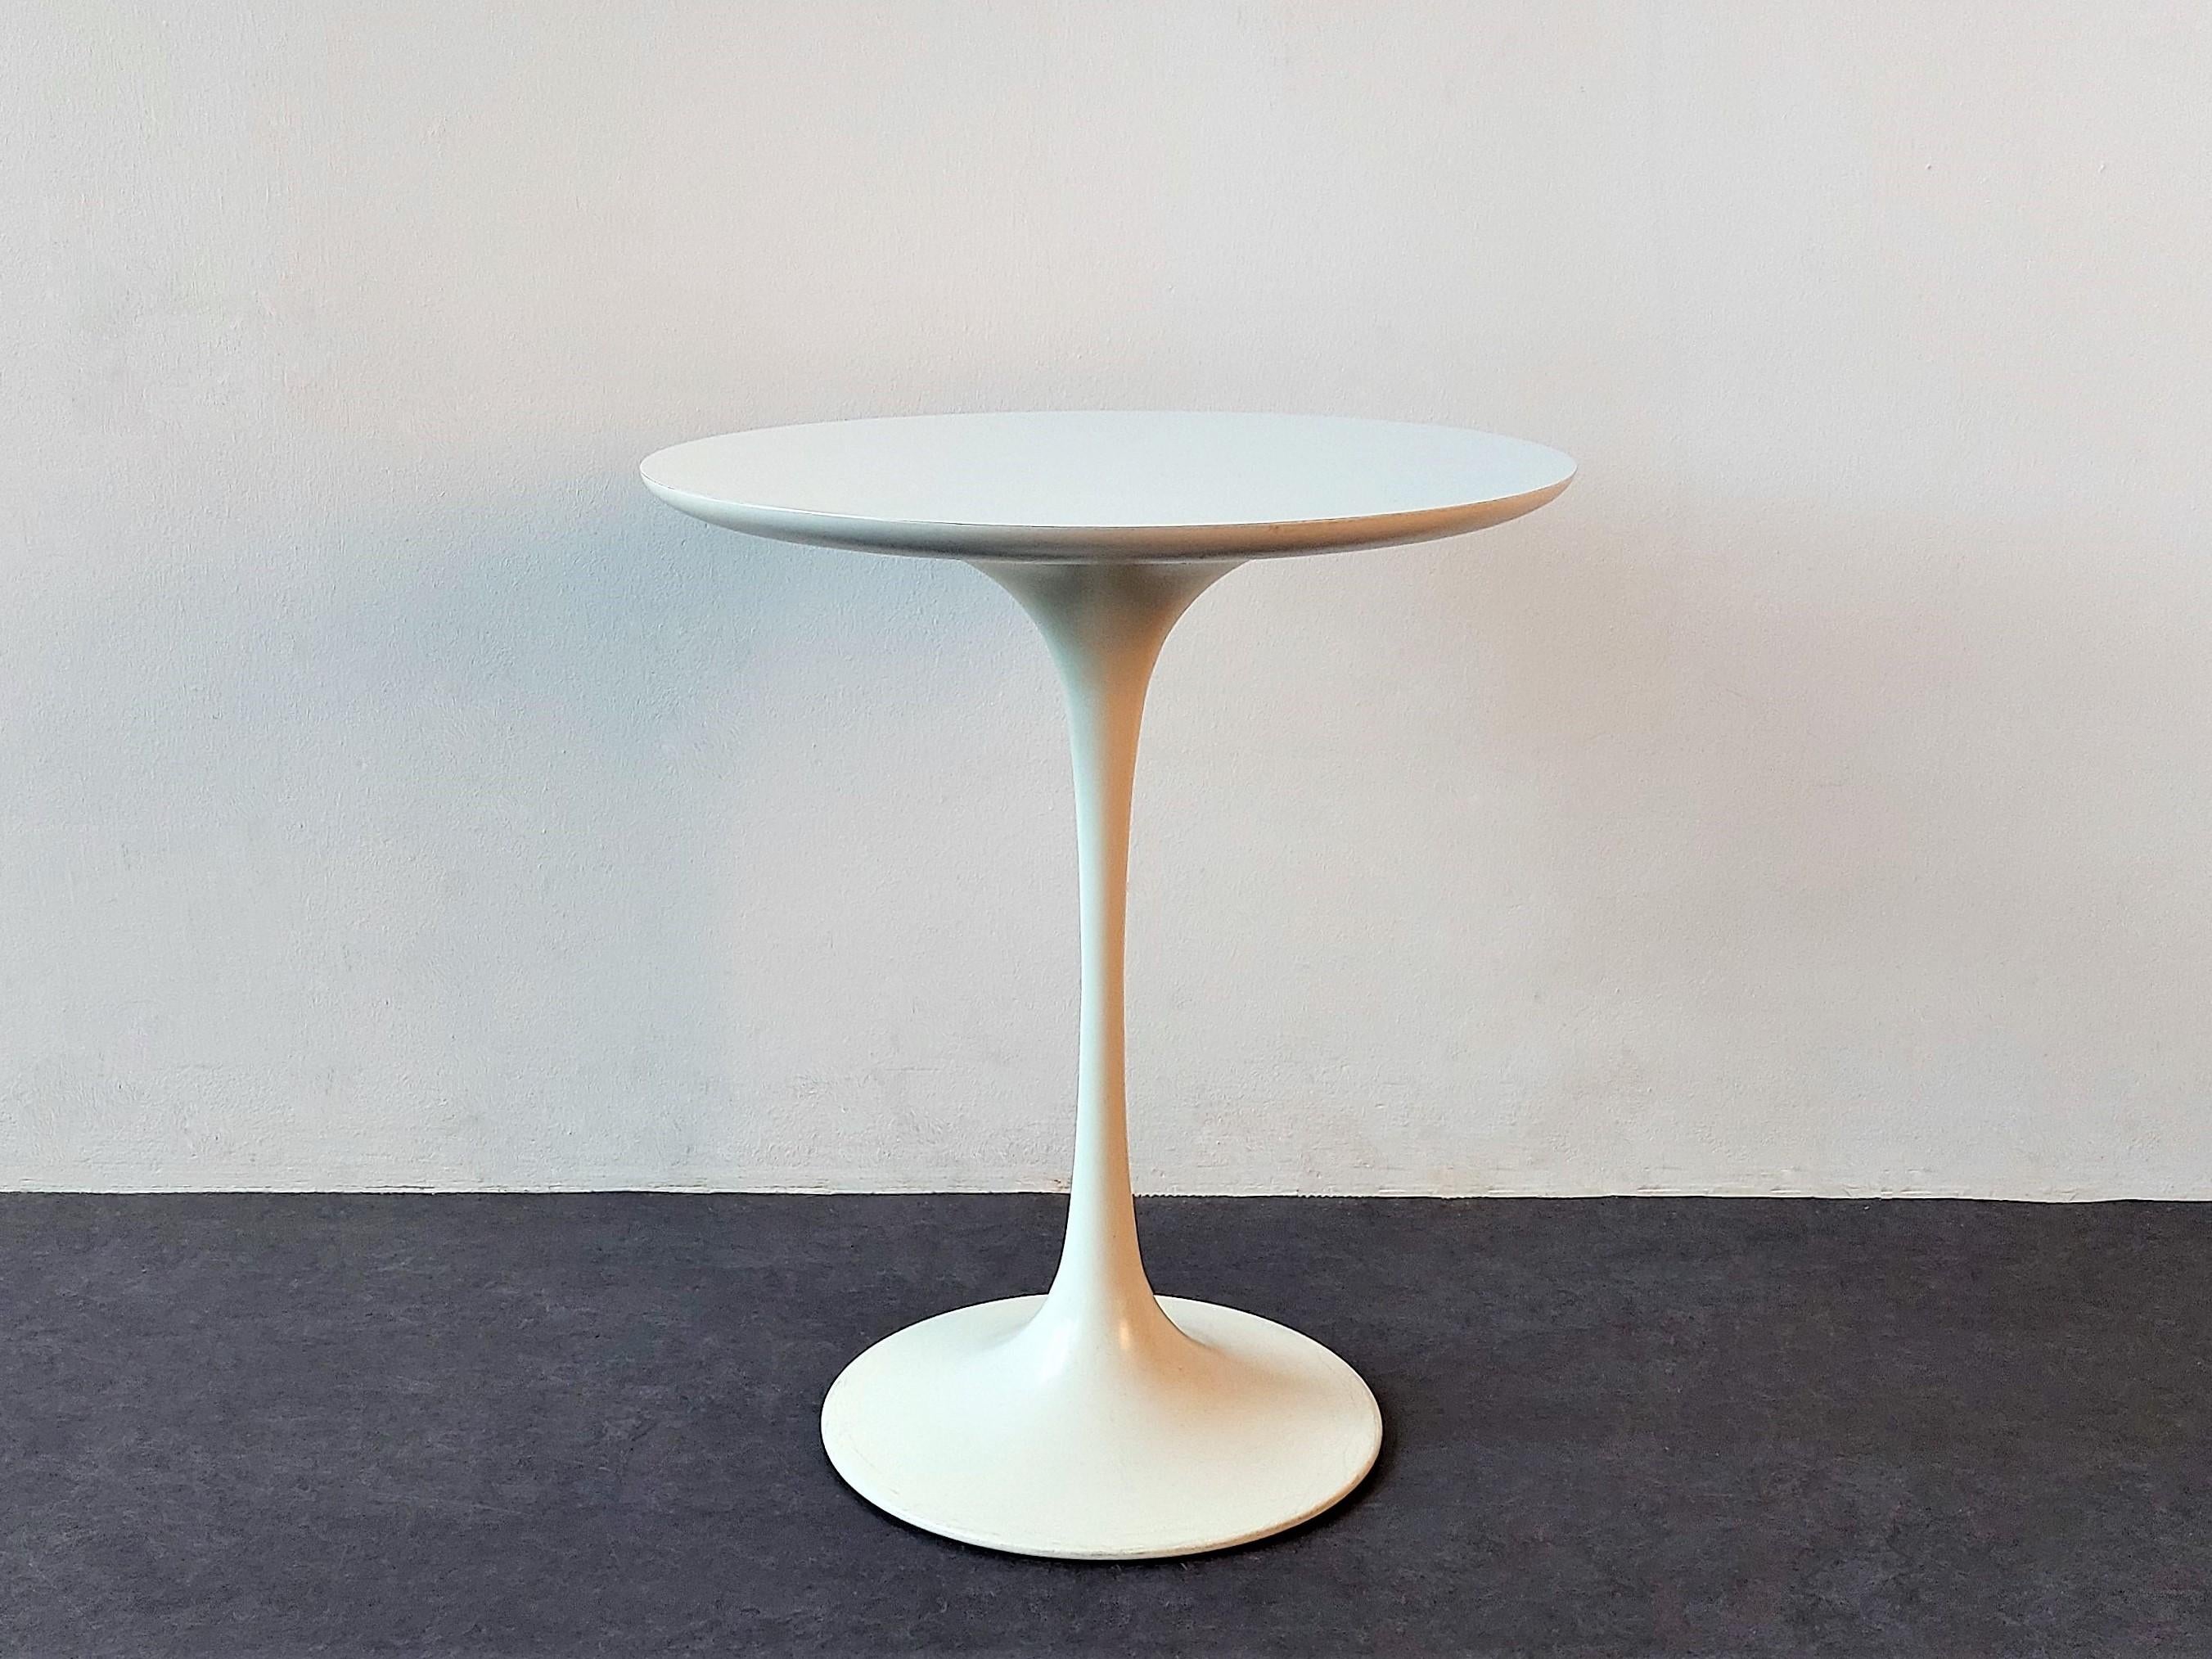 This stunning side table is a design by Maurice Burke for Arkana in Engeland in the early 1960's. It is an iconic Space Age design, inspired by the Eero Saarinen design for Knoll from the late 1950's. The table has a white rounded laminated table